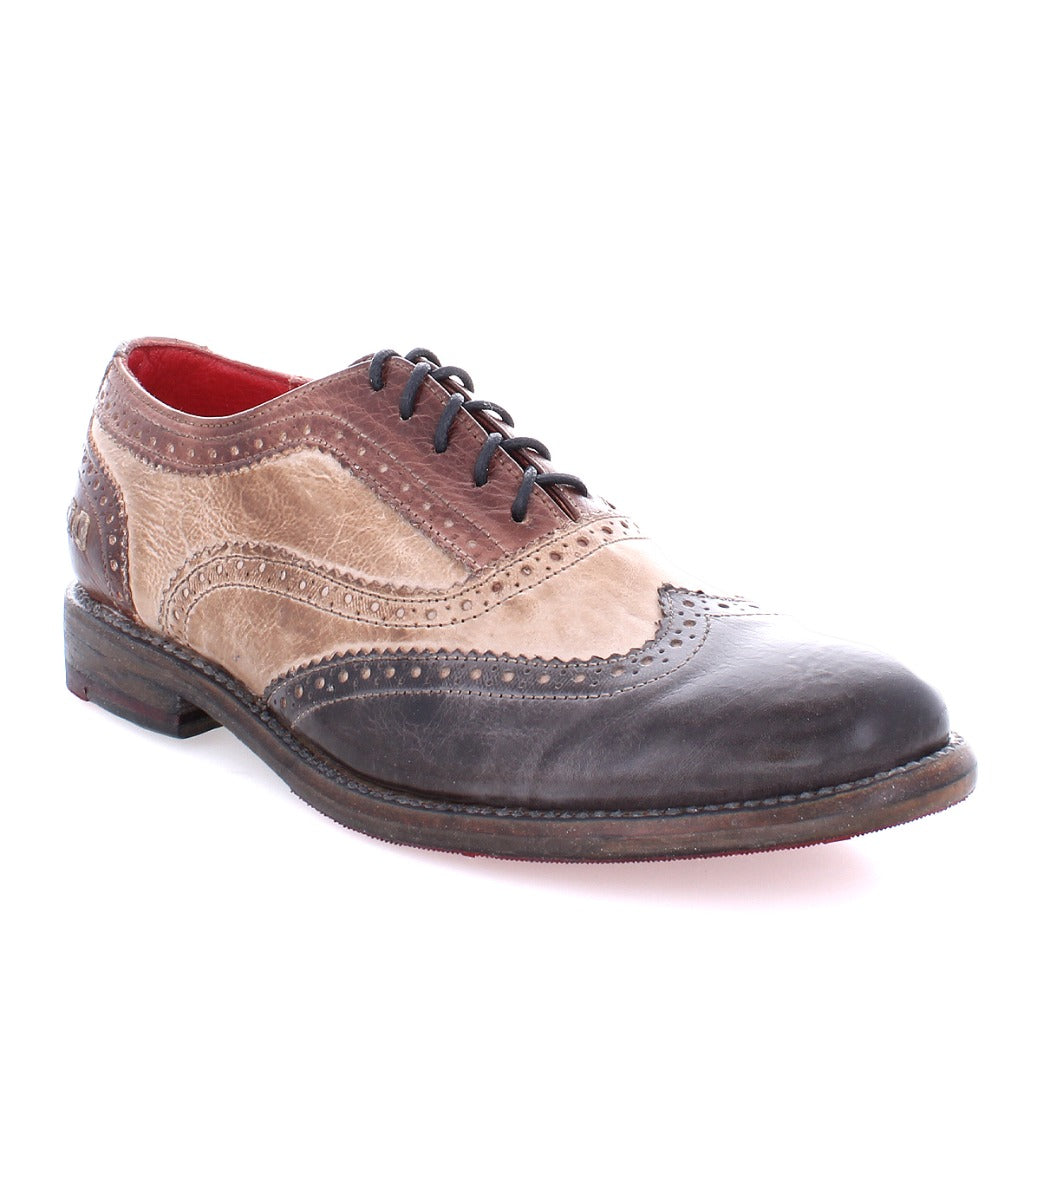 A woman's wingtip oxford shoe, the Lita by Bed Stu, with brown and black detailing.